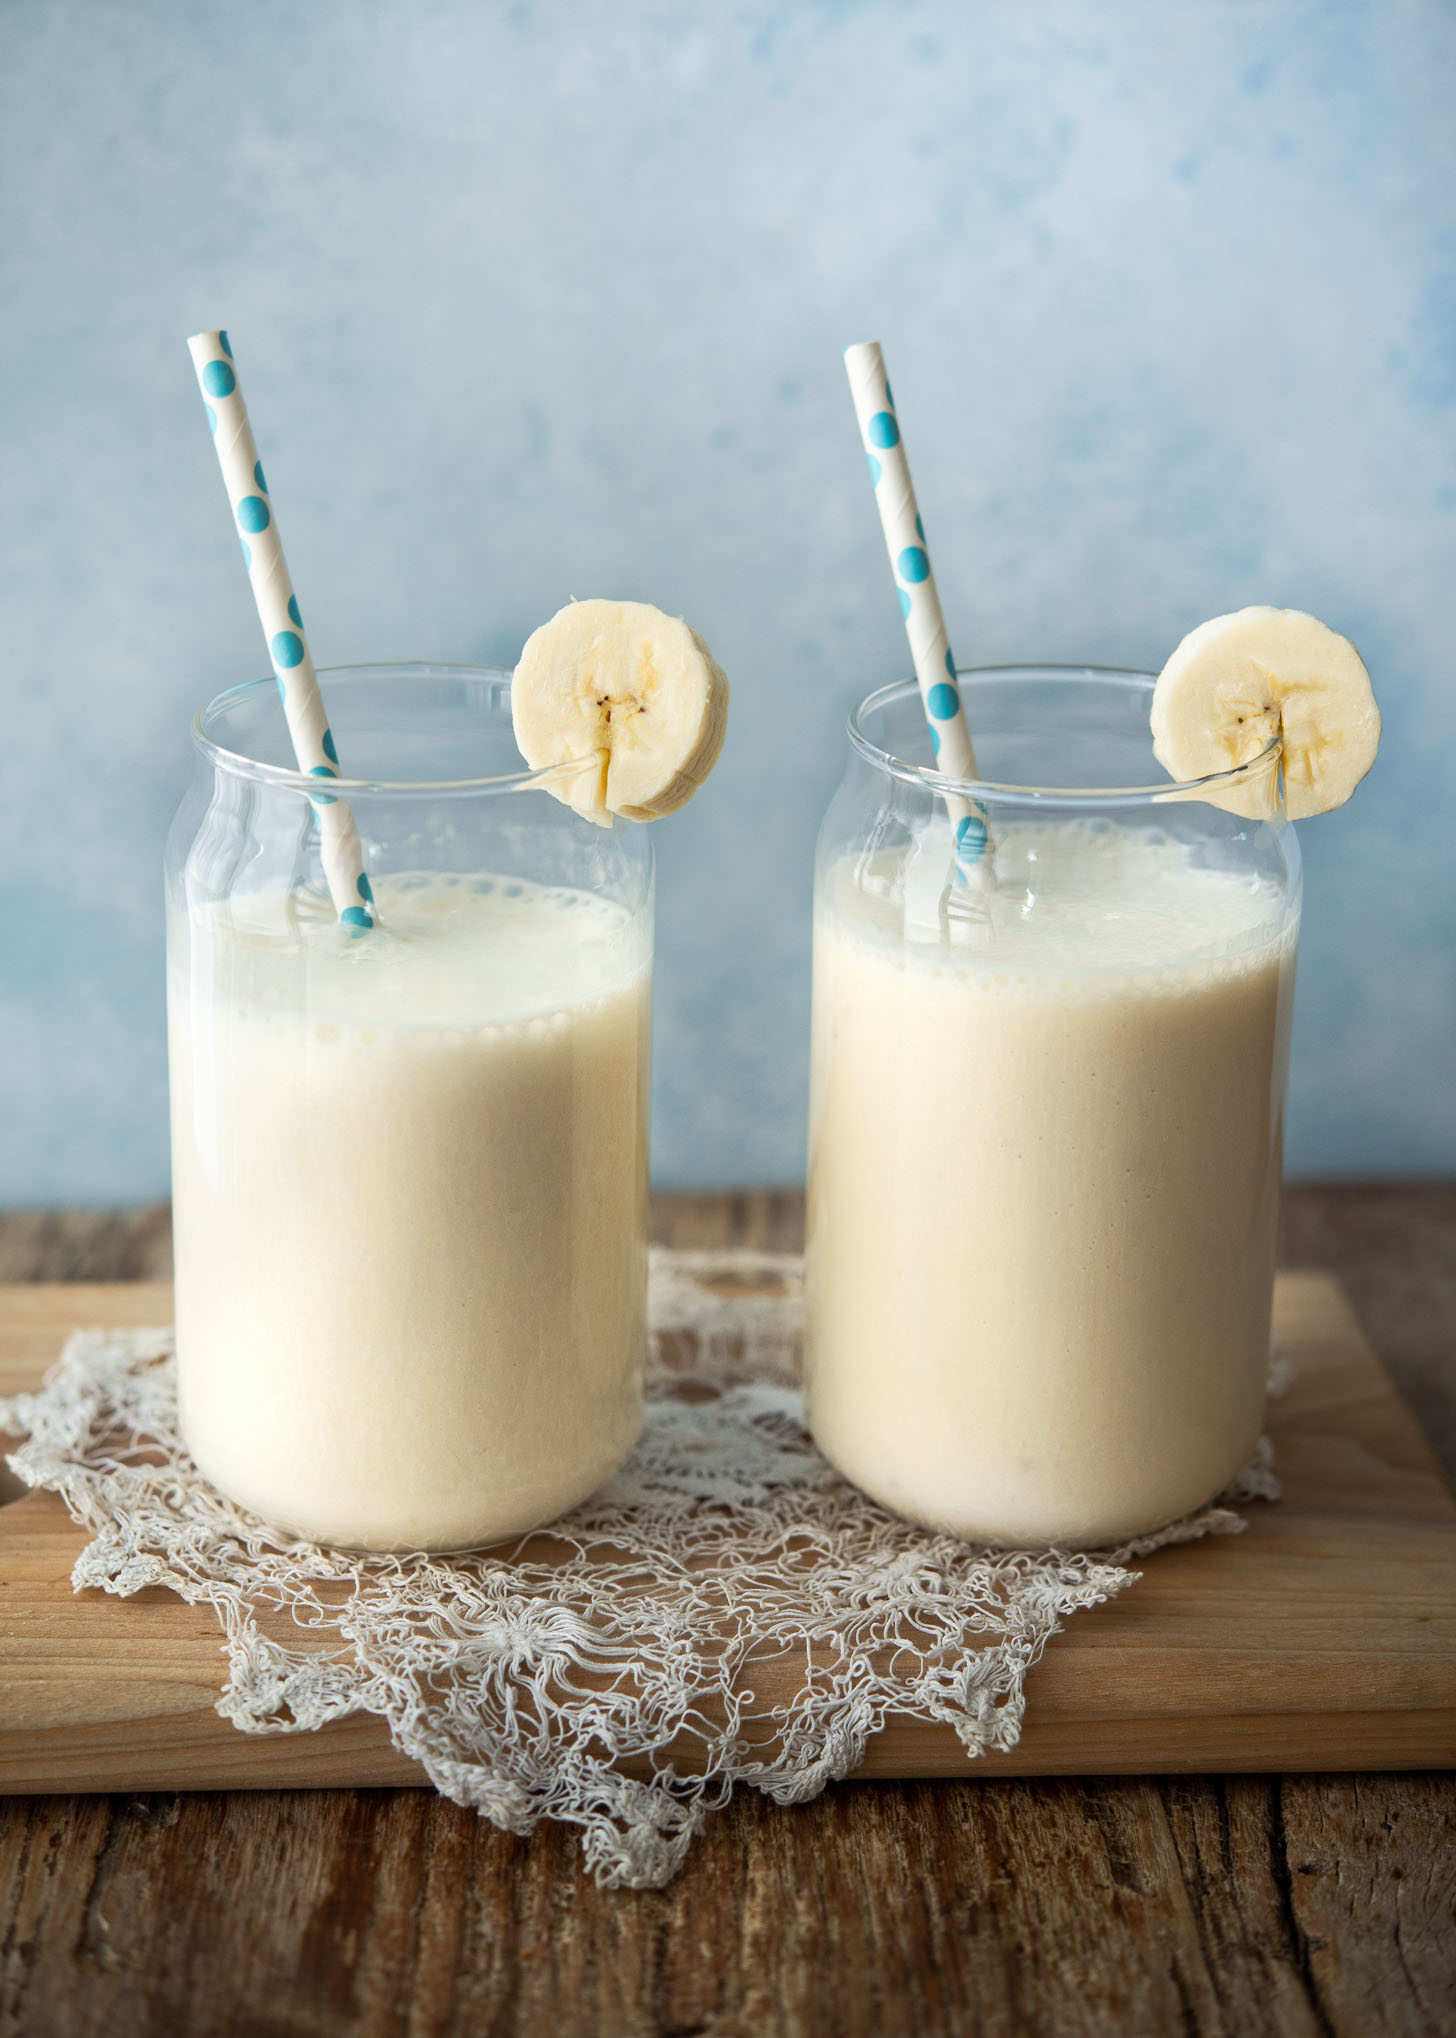 Fresh homemade banana milk made with 3 ingredients for a Korean drink.